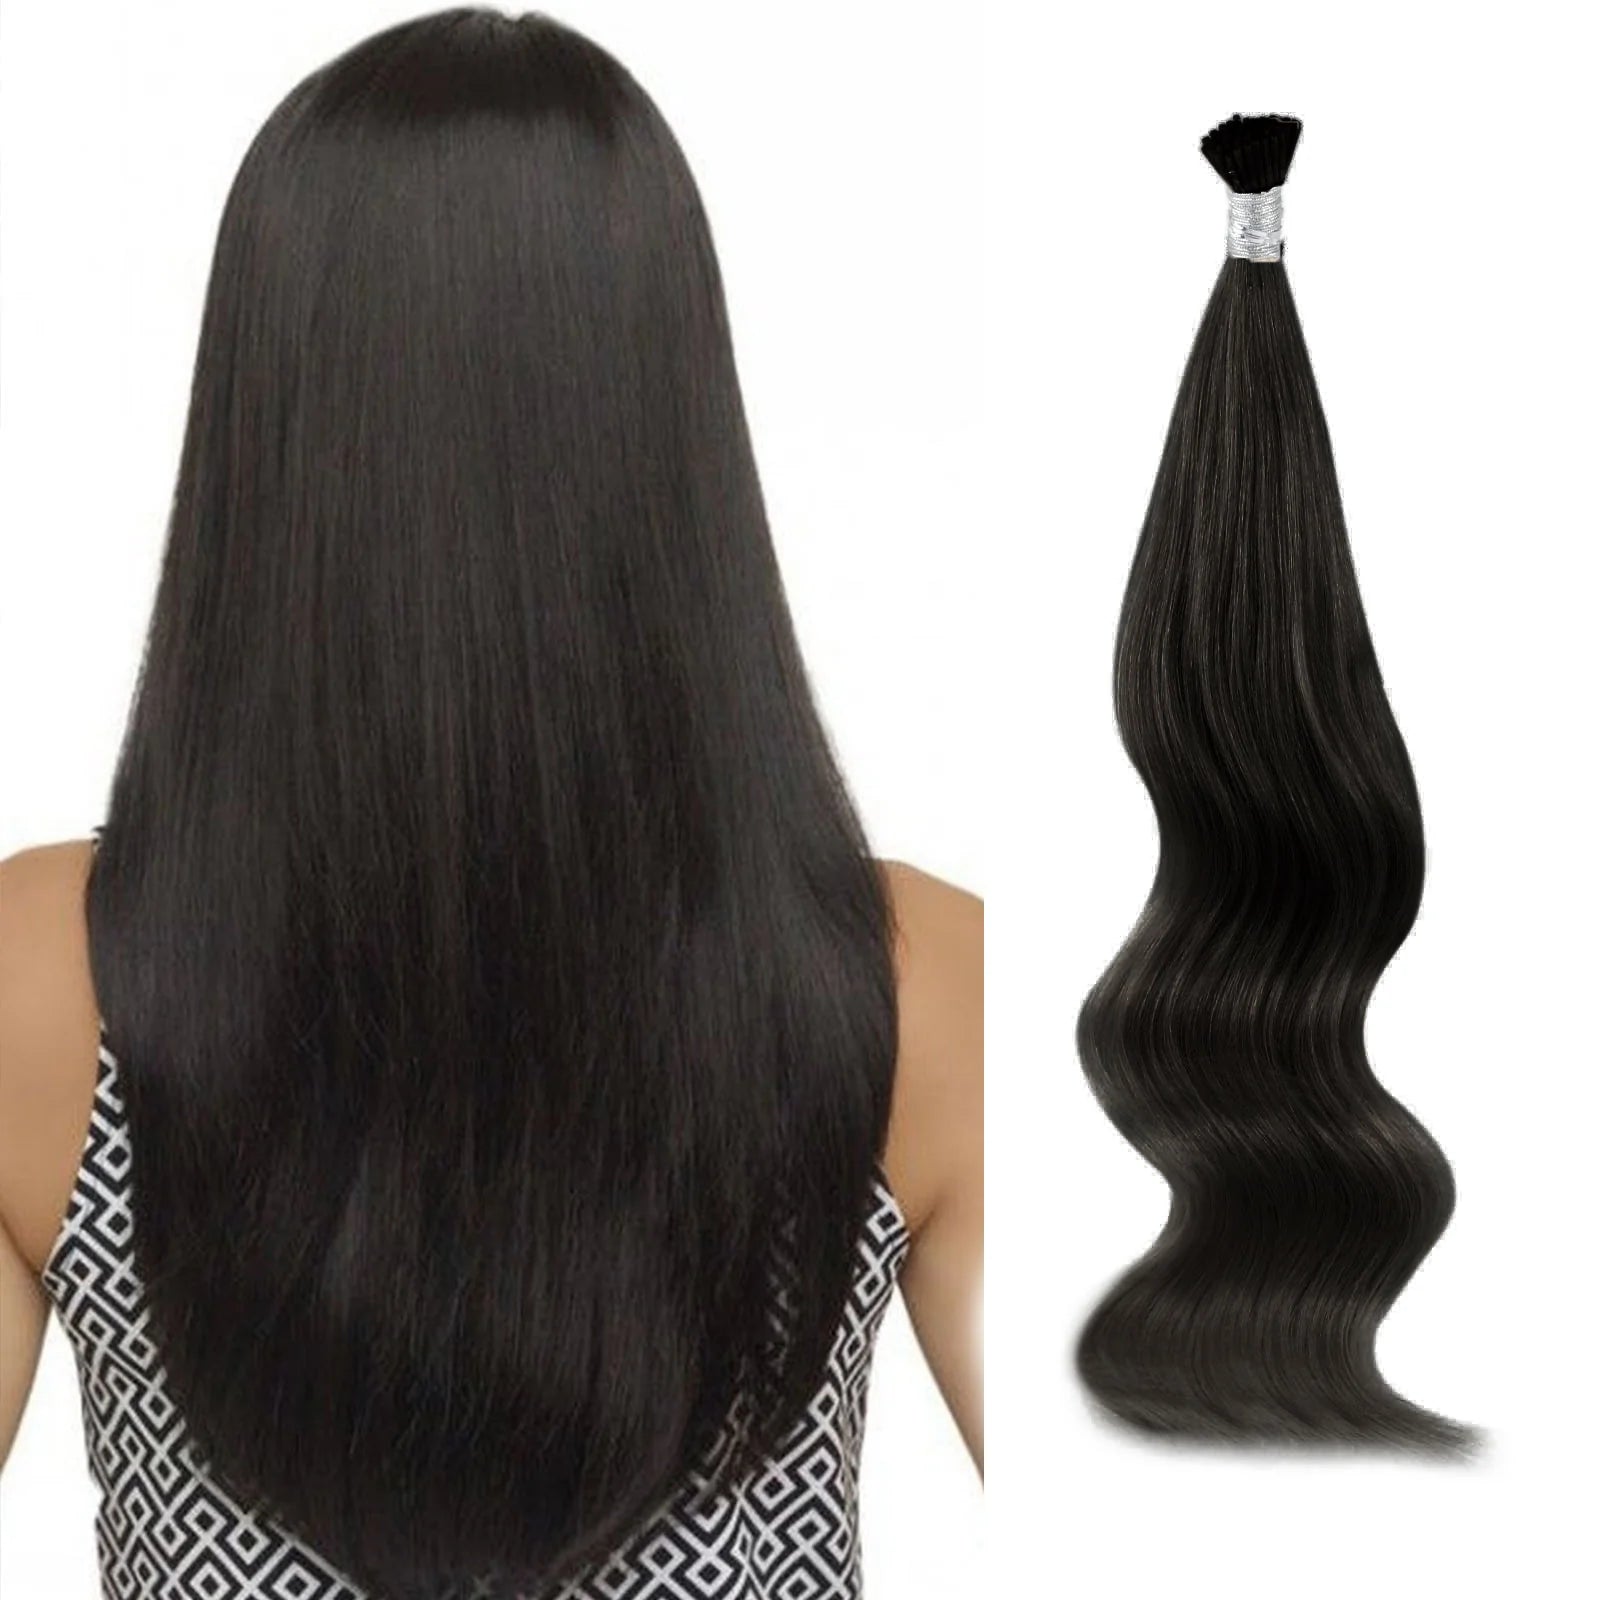 I-tip Hair Extension Raw Virgin Hair Straight 18-26inch Dark and Light Color 100grams